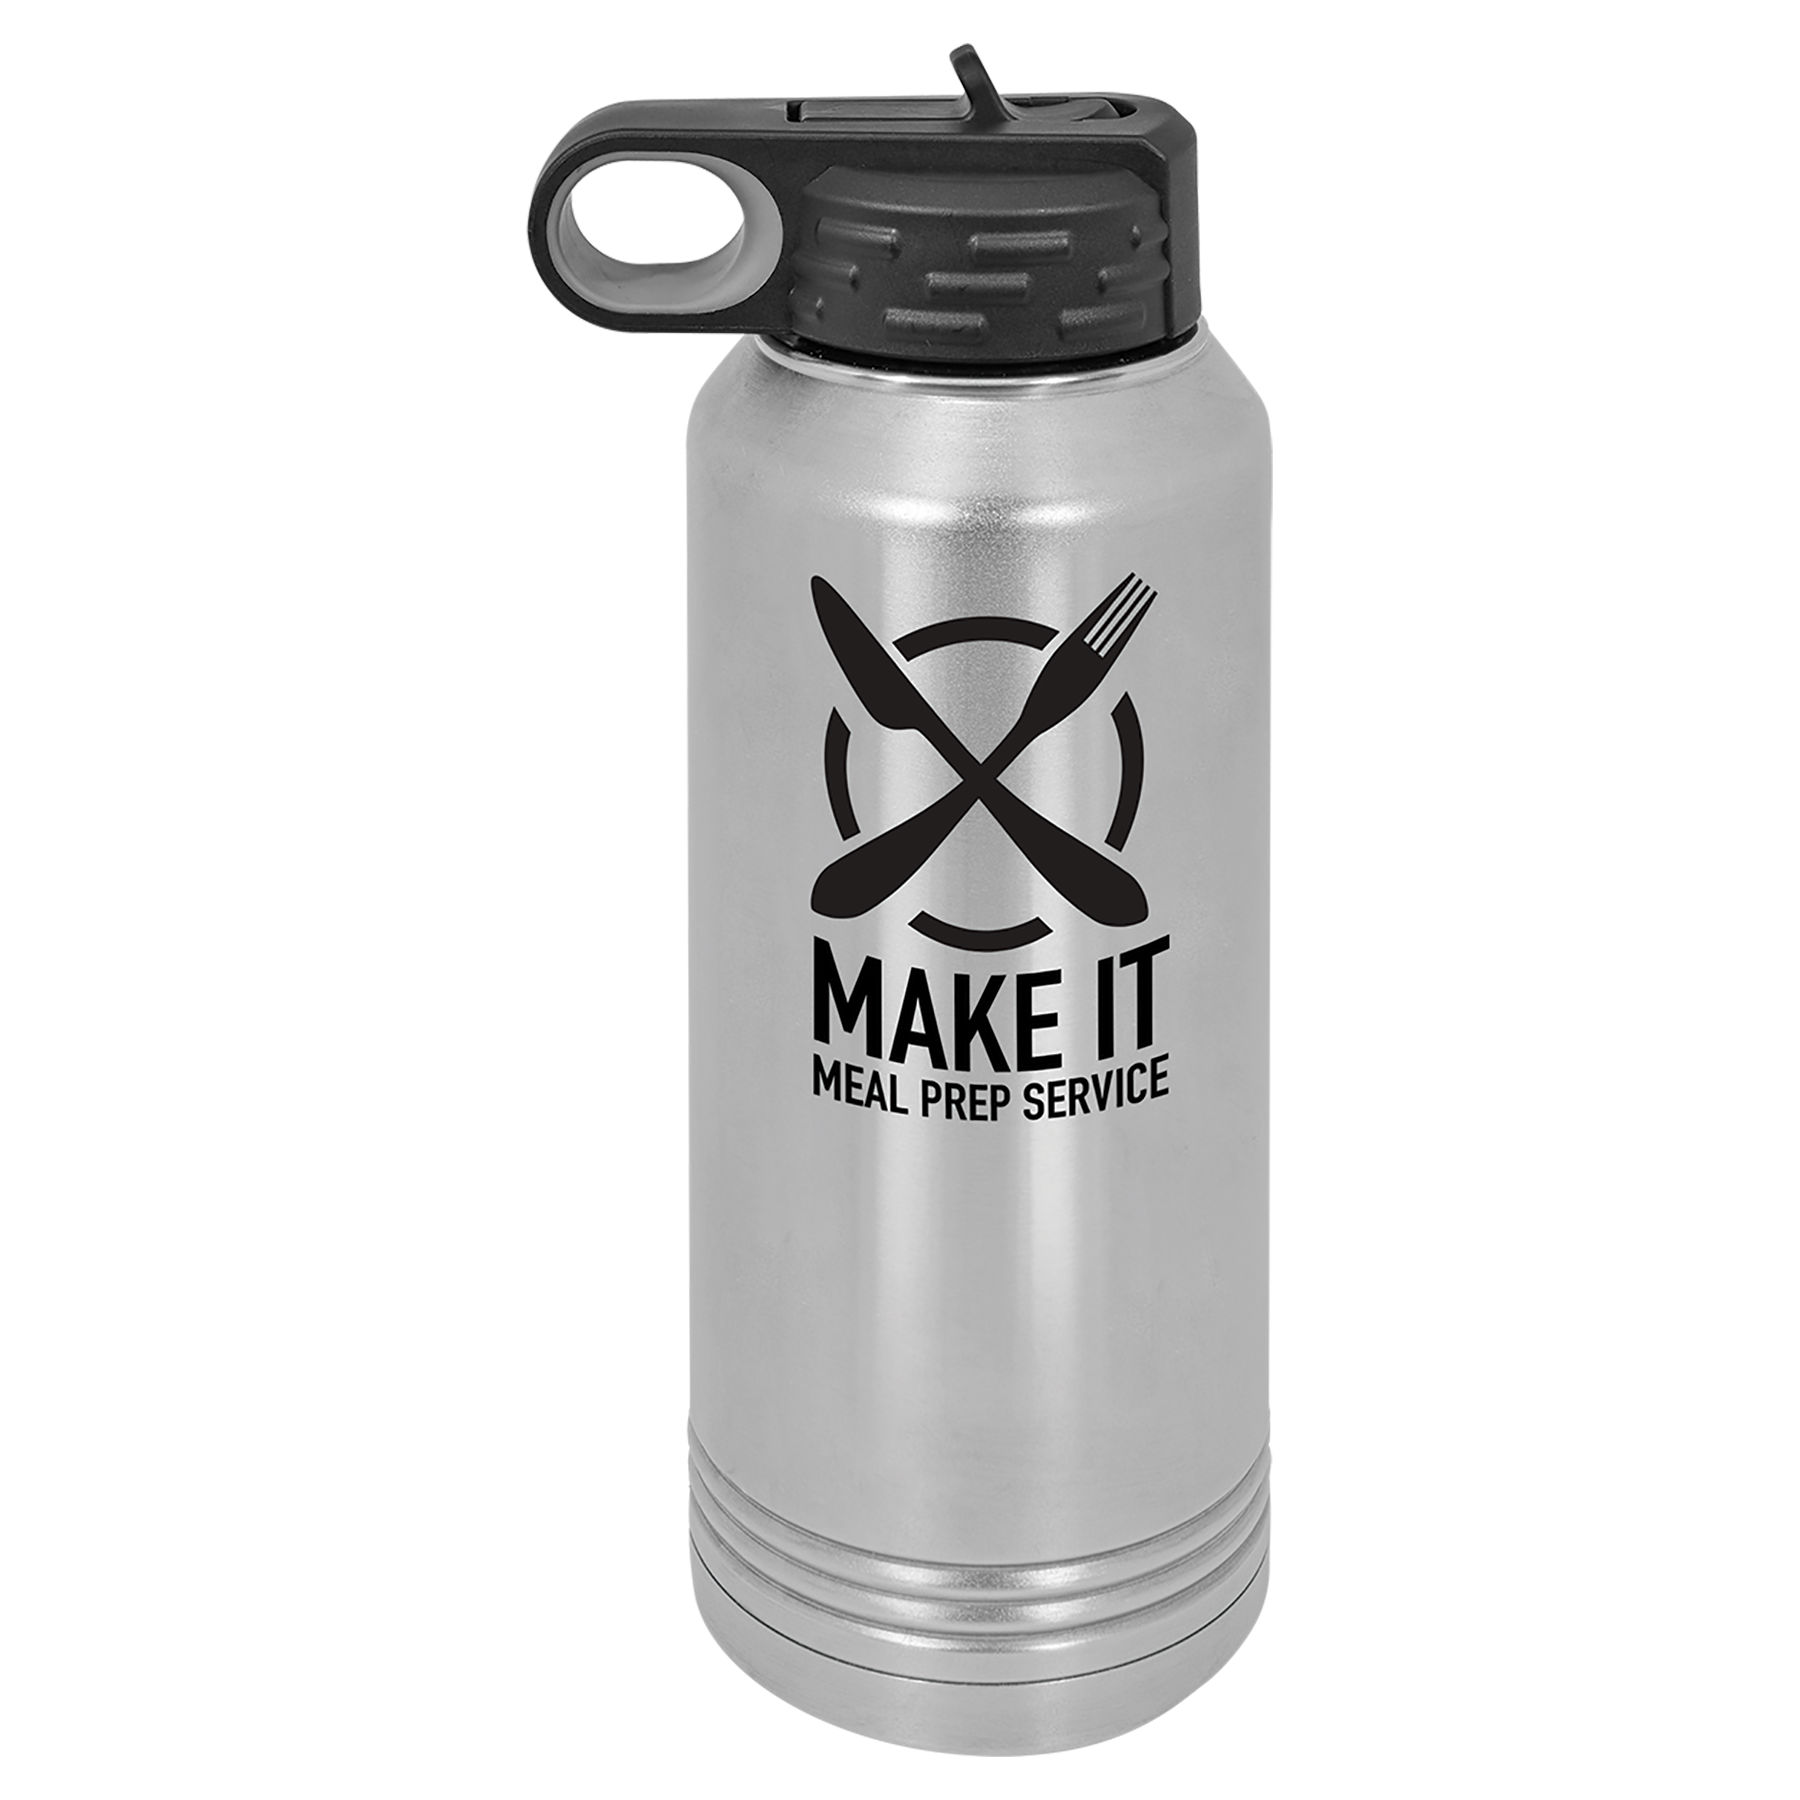 32 oz. Stainless Steel Insulated Water Bottler.  Customizable with your personal image or saying.